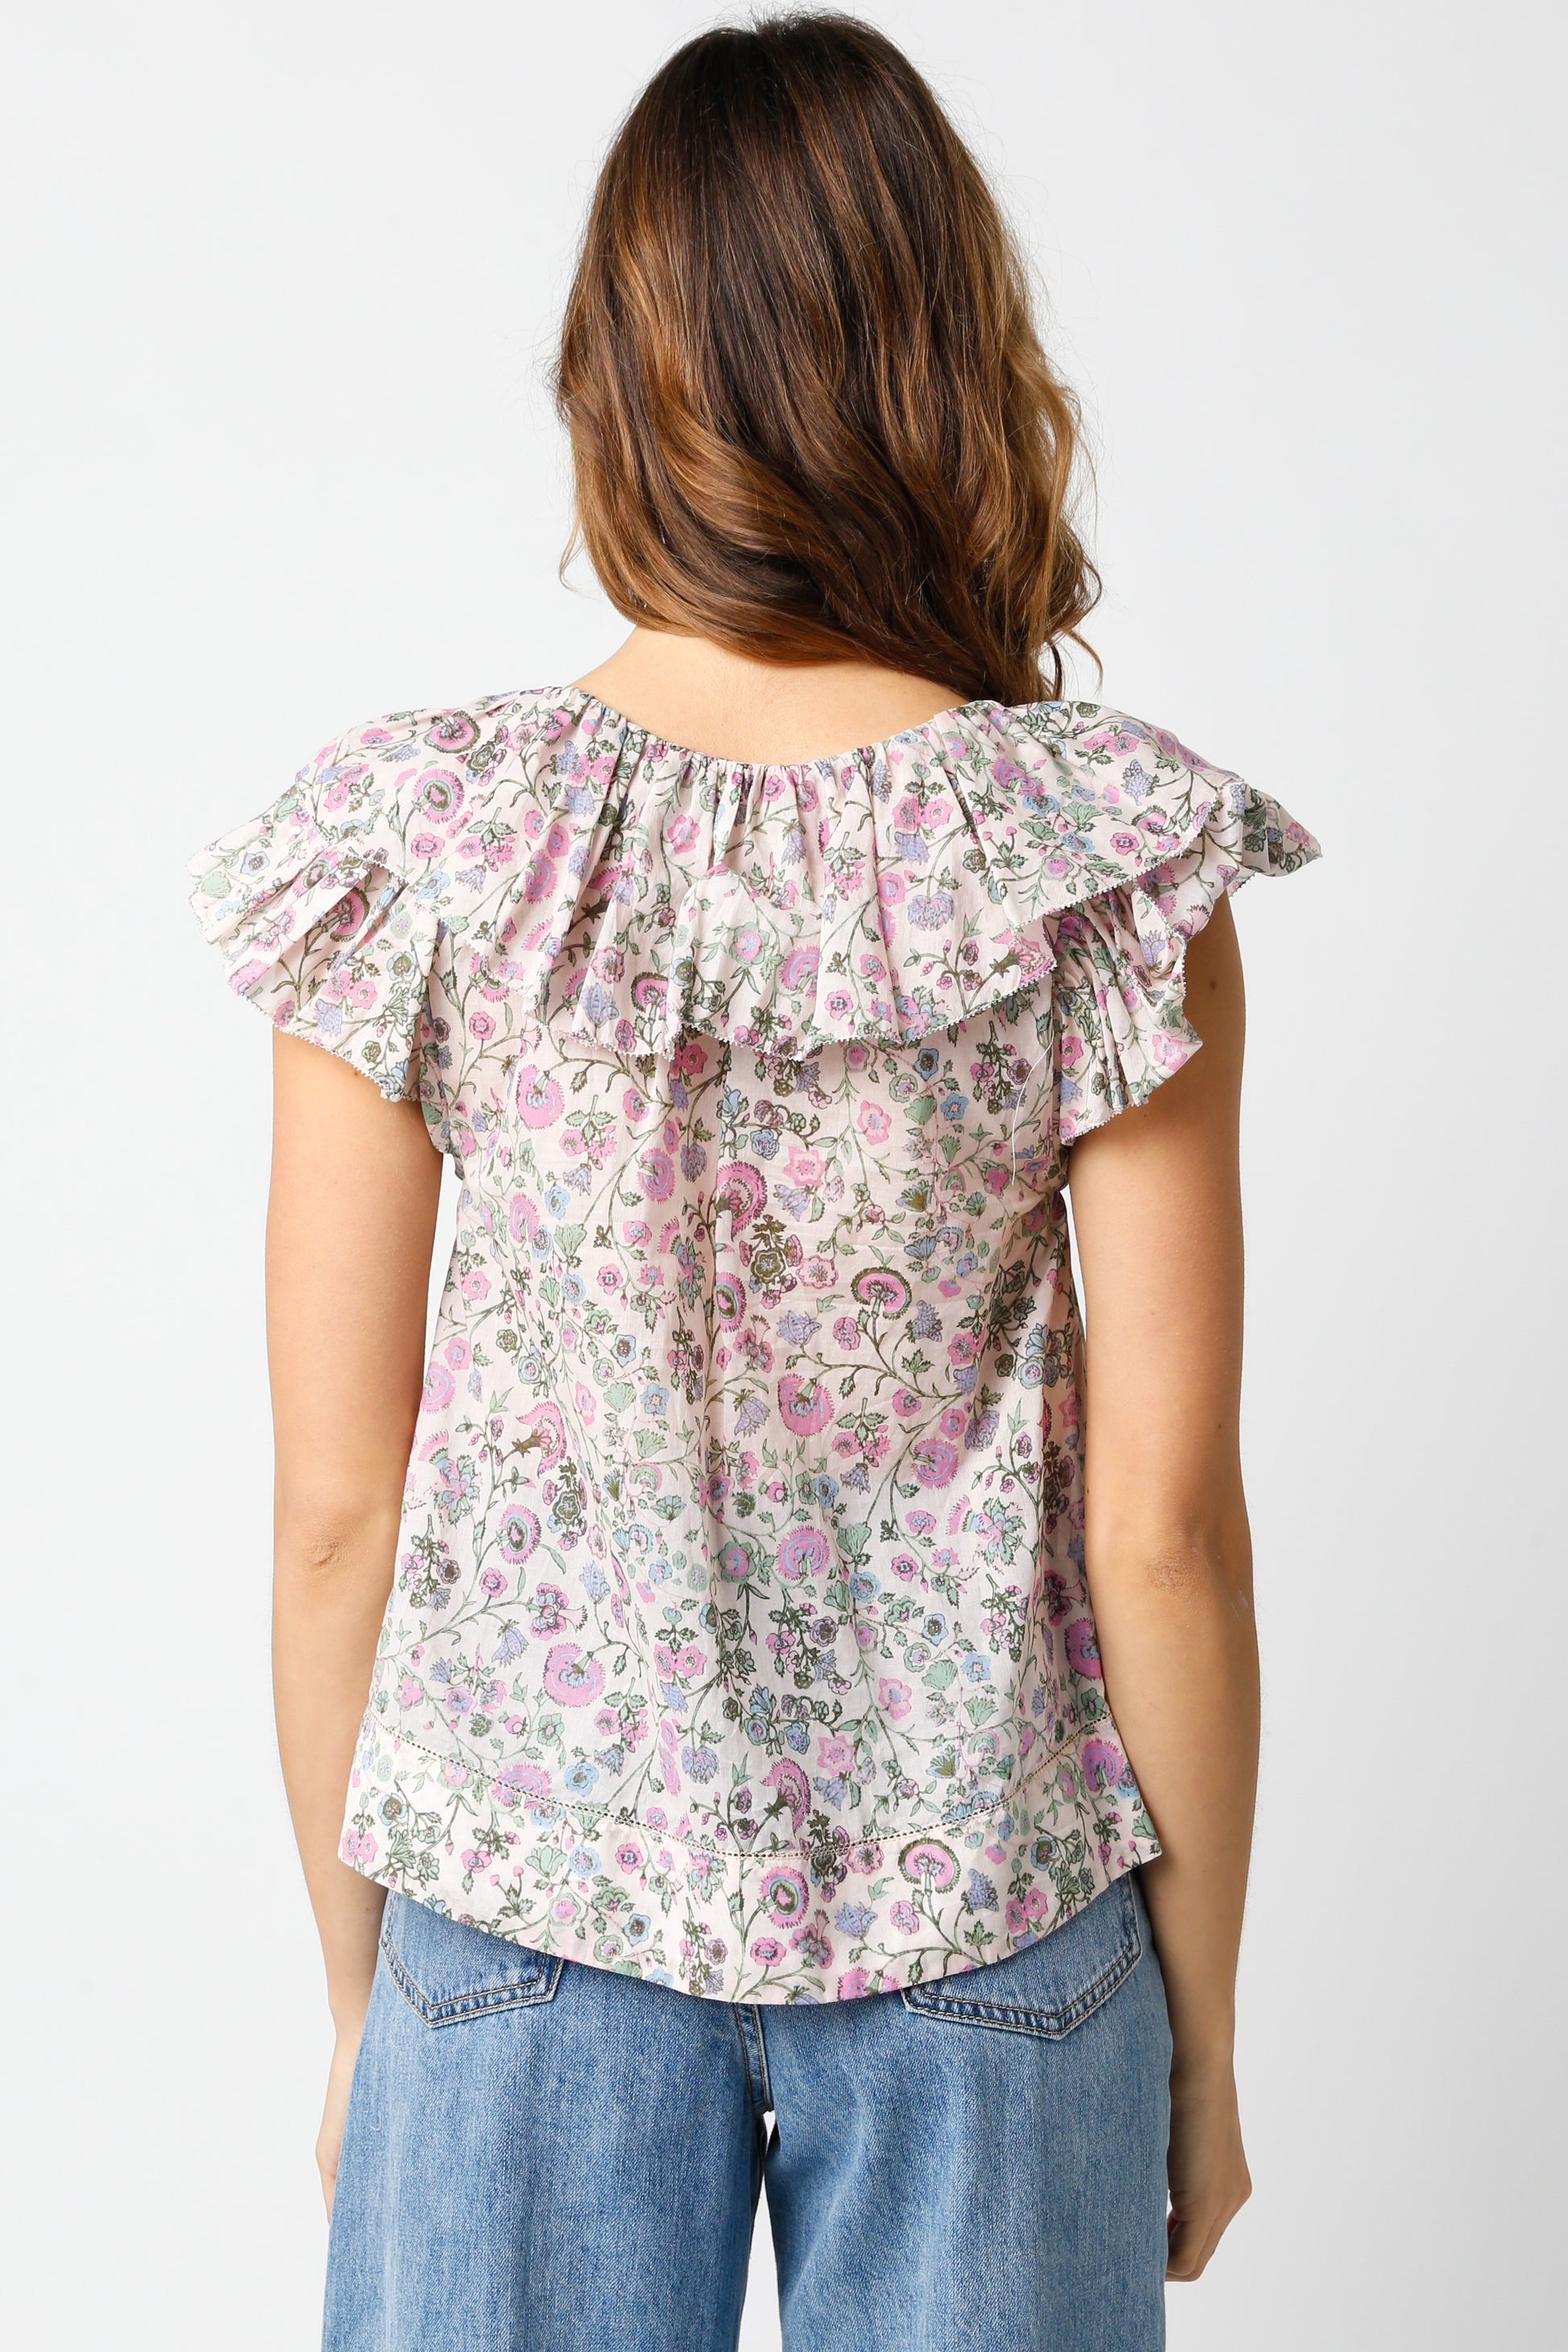 Tiered Collar Sleeveless Floral Top